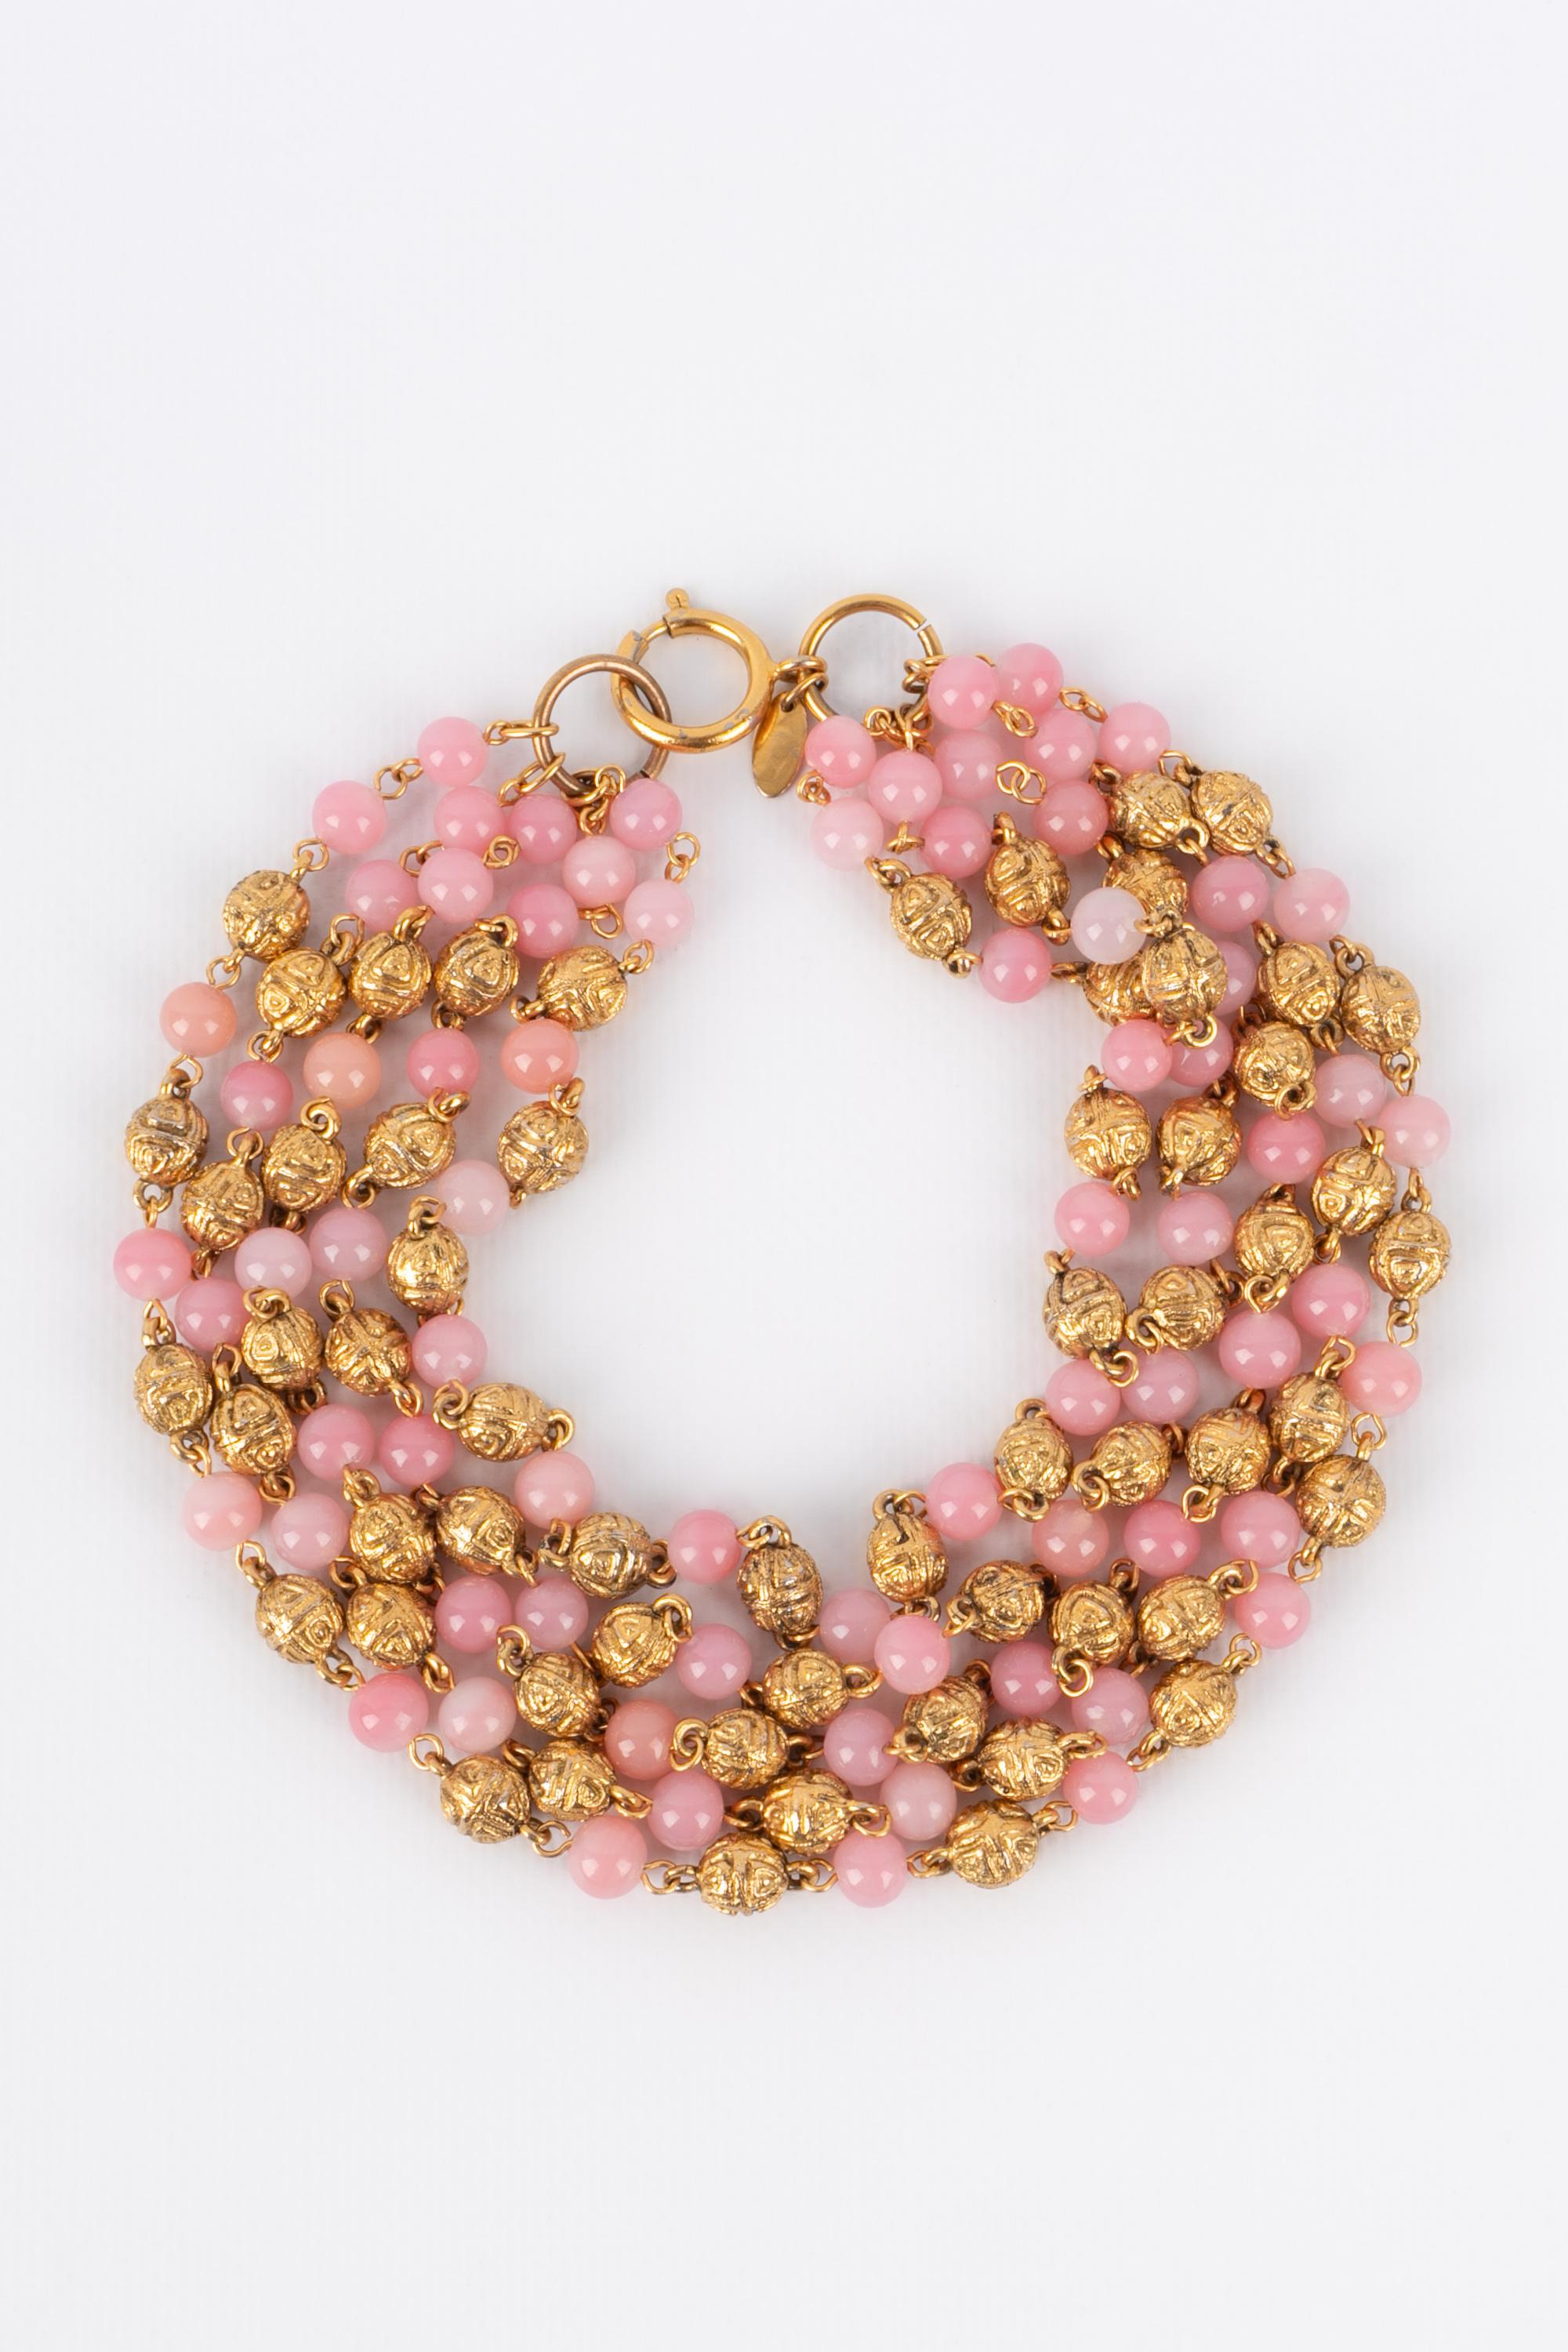 CHANEL - (Made in France) Short necklace composed of multiple rows of pink glass pearls and golden metal pearls. Jewelry from the beginning of the 1980s.

Condition:
Very good condition

Dimensions:
Length: 40 cm

CB239